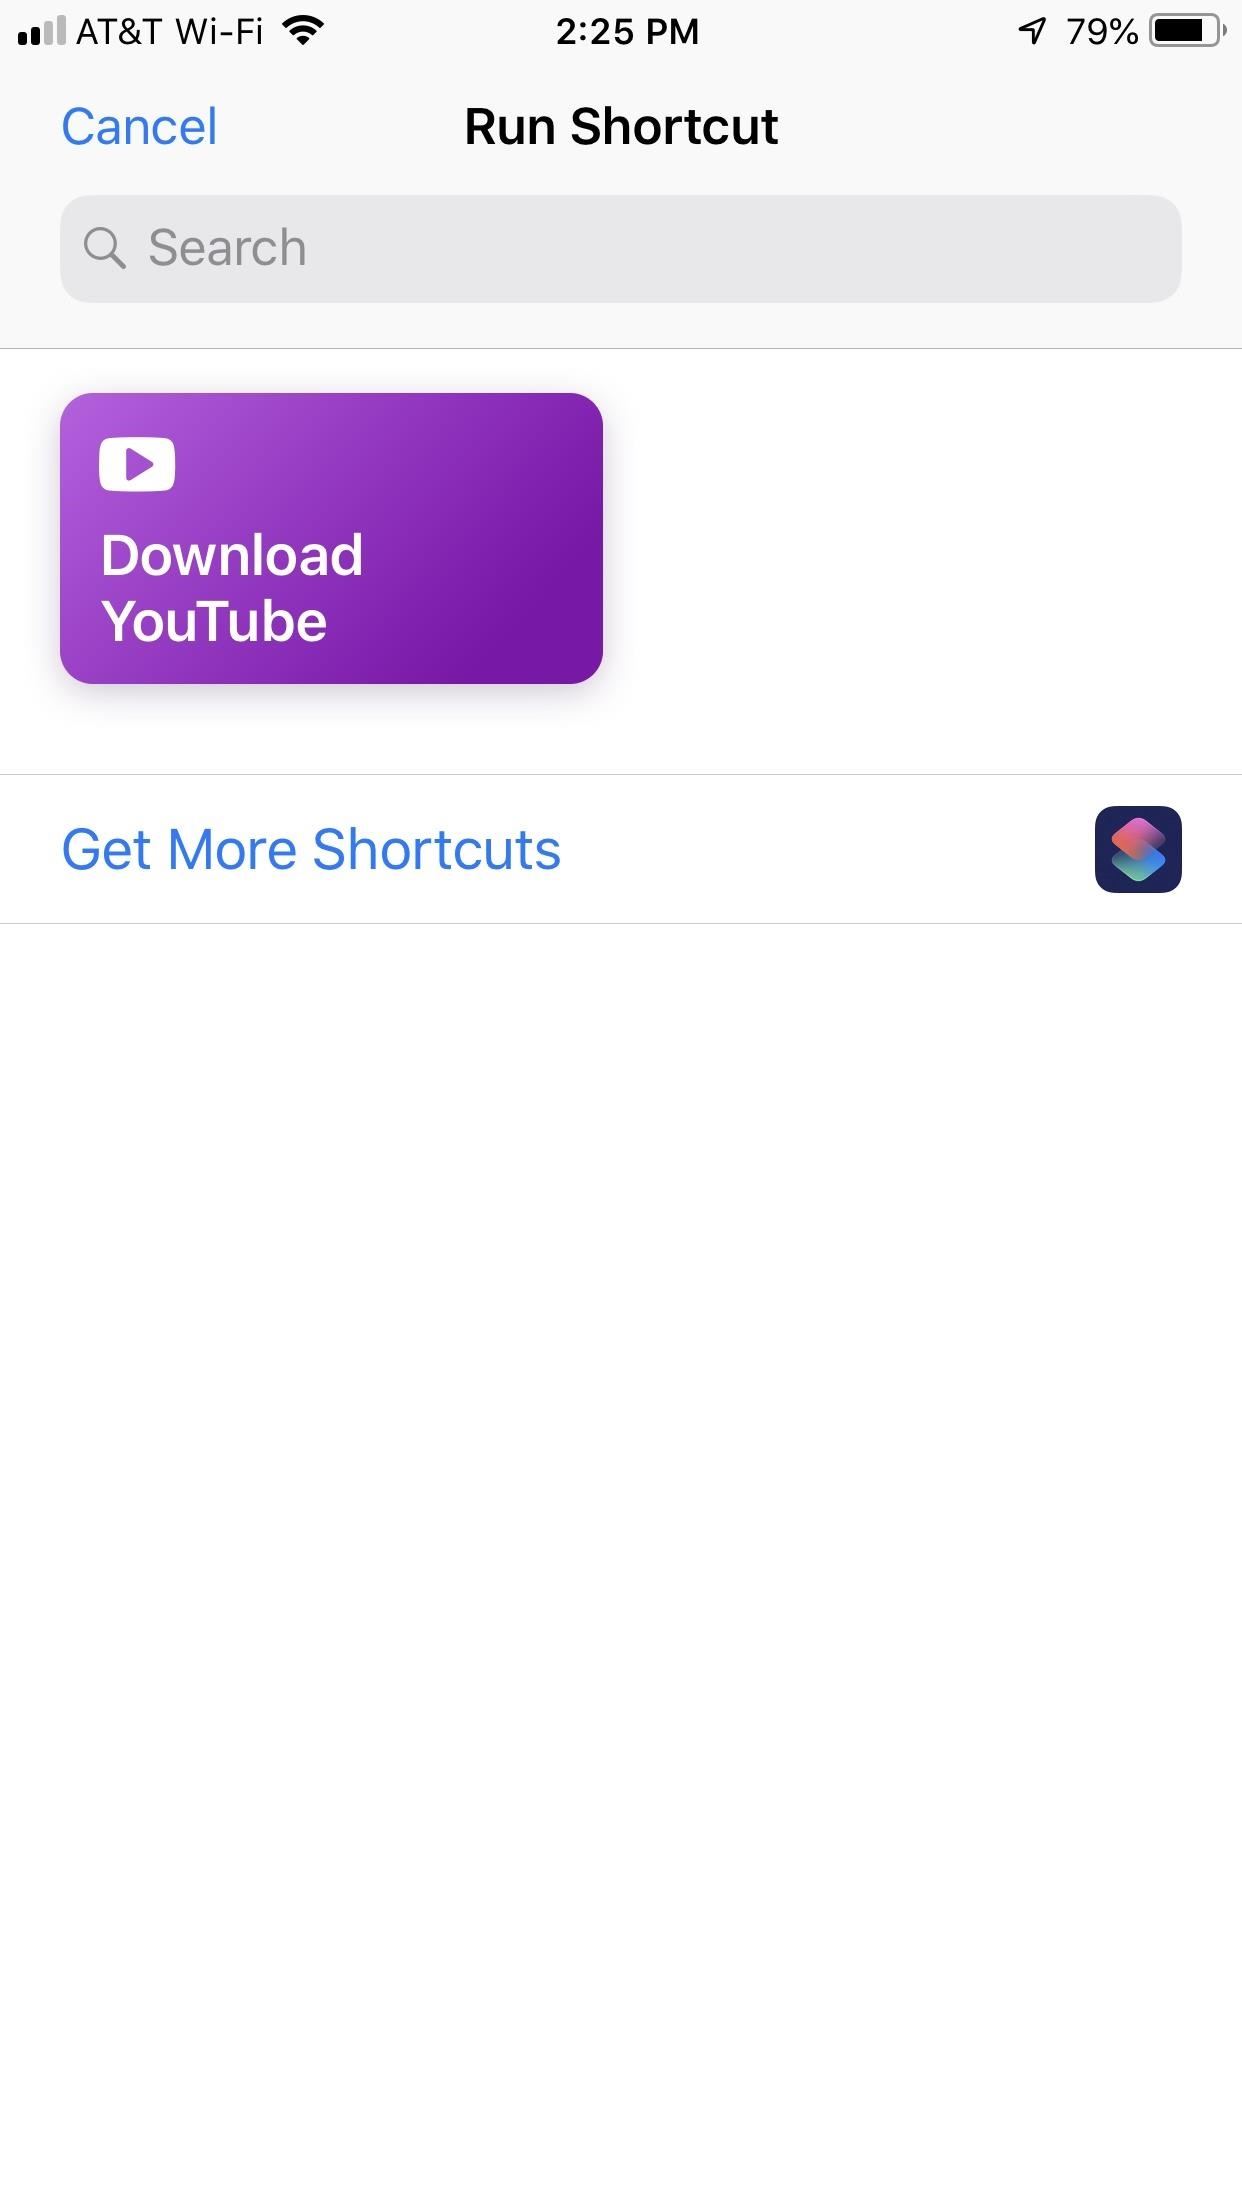 This Shortcut Lets You Download YouTube Videos on Your iPhone Straight from the Source, No Shady Services Needed